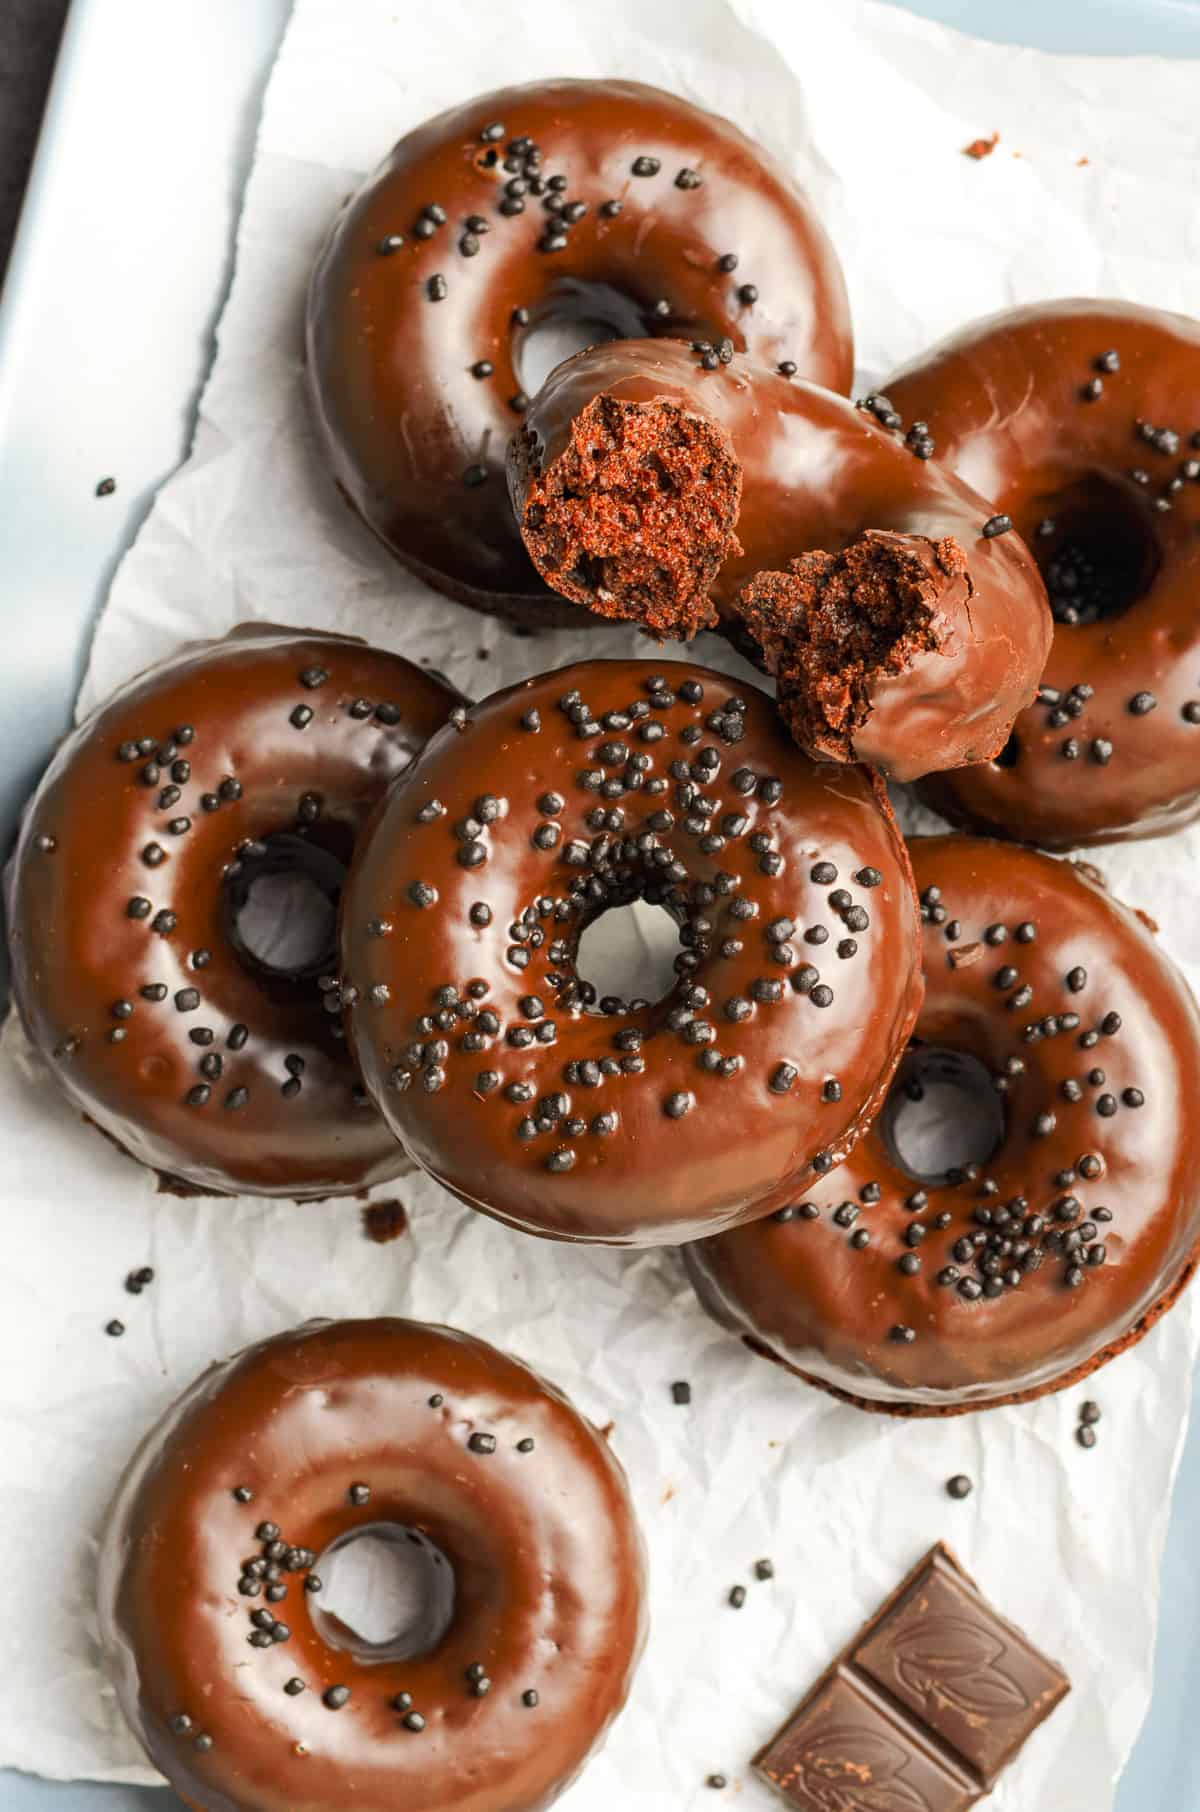 https://www.thecookierookie.com/wp-content/uploads/2020/11/chocolate-donuts-recipe-7-of-7.jpg